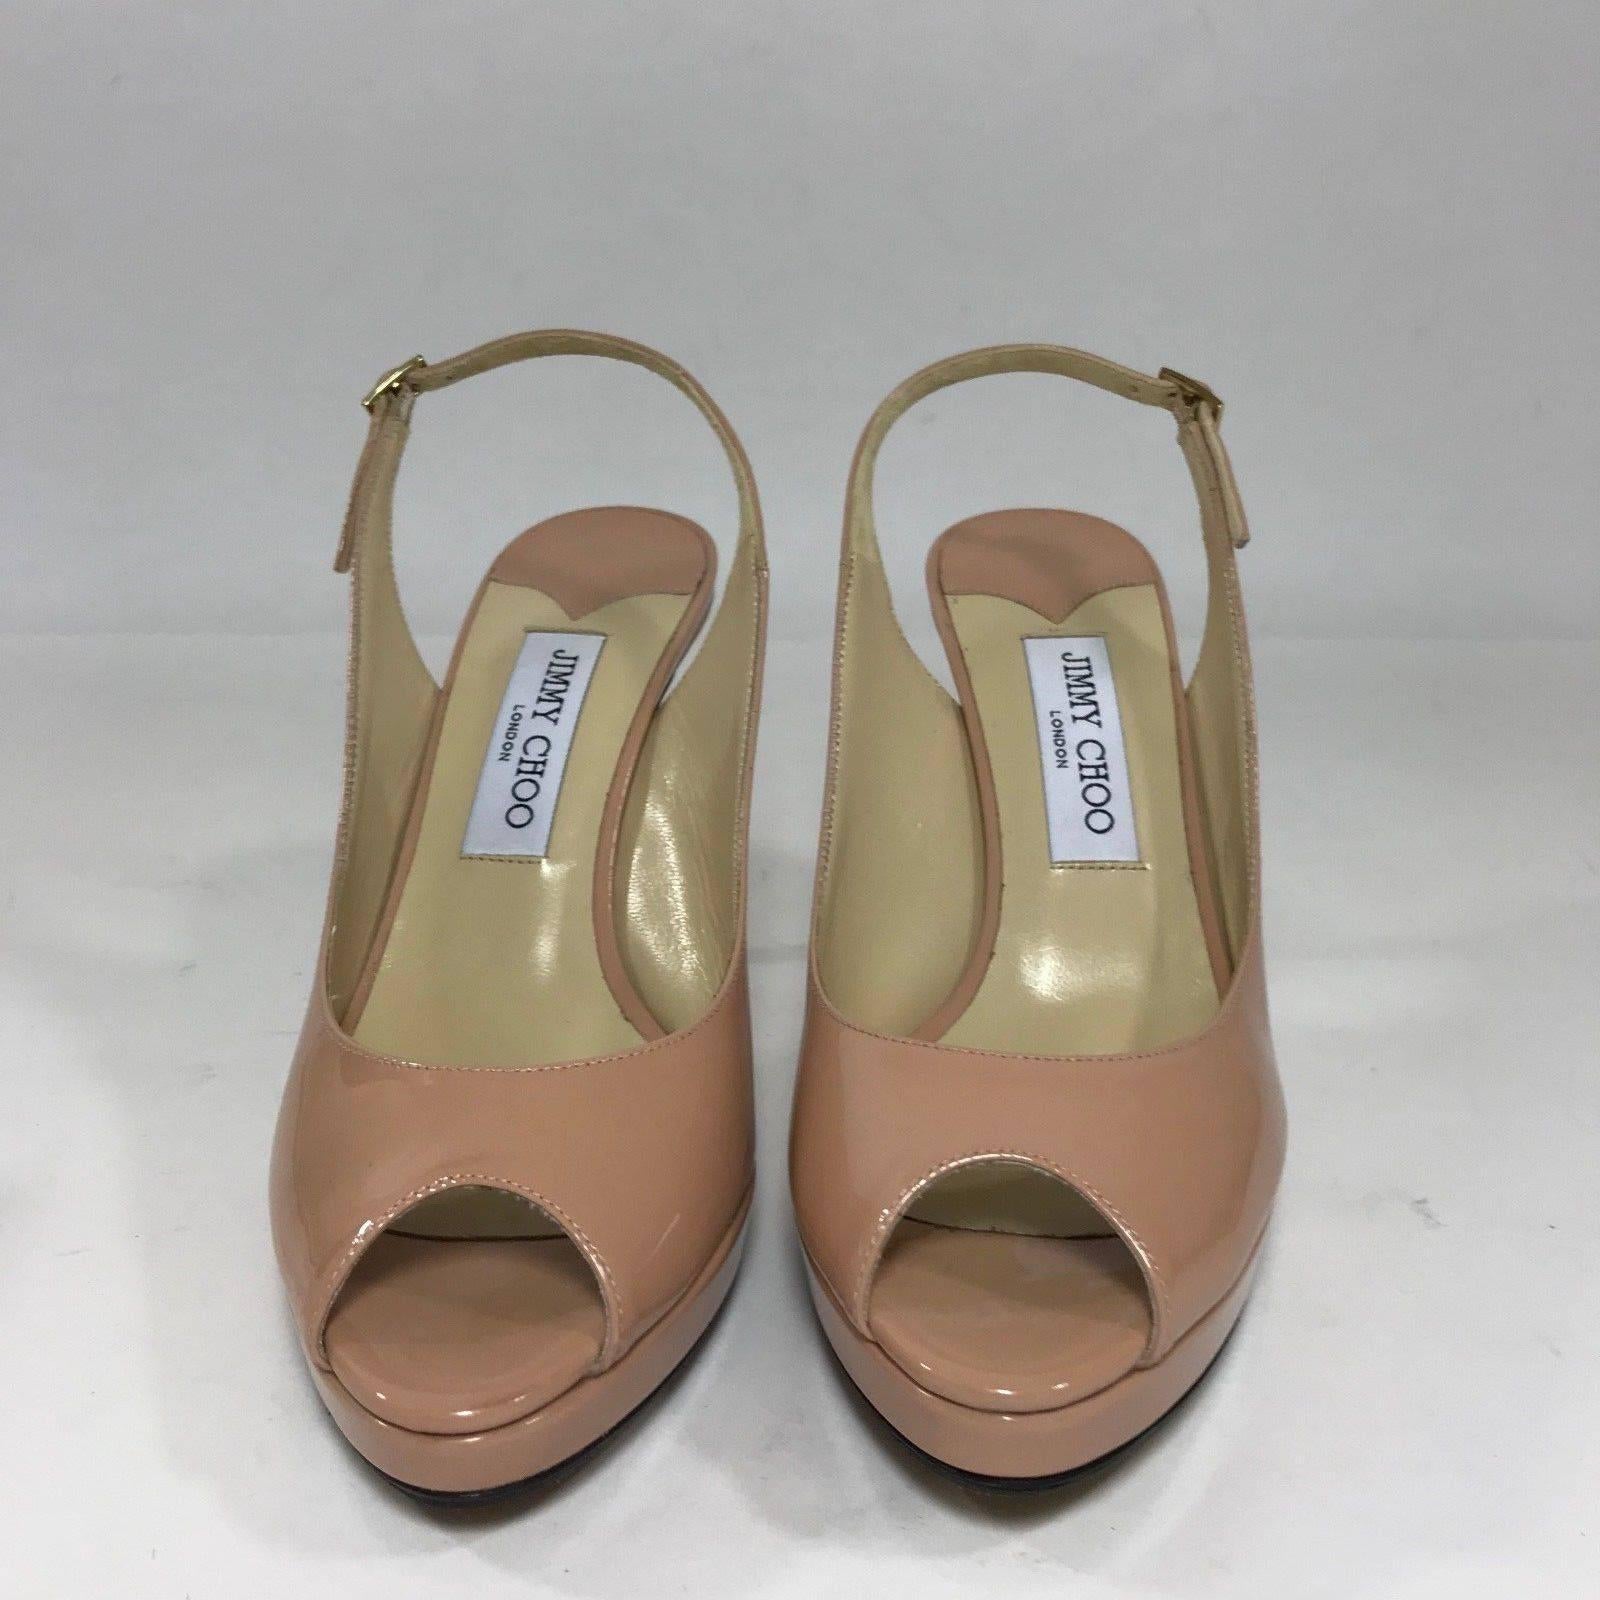 MODEL - Jimmy Choo Nova Slingback Pump in Blush Patent
	
SKU - 1697
	
ORIGINAL RETAIL PRICE - 665 +tax
	
SIZE - US 10/Euro 40
	
MODEL DETAILS - 123 Nova
	
MATERIAL - Patent Leather
	
COLOR - Blush
	
COMES WITH - Box and Dust Bag
	
MEASURMENTS - 4.5